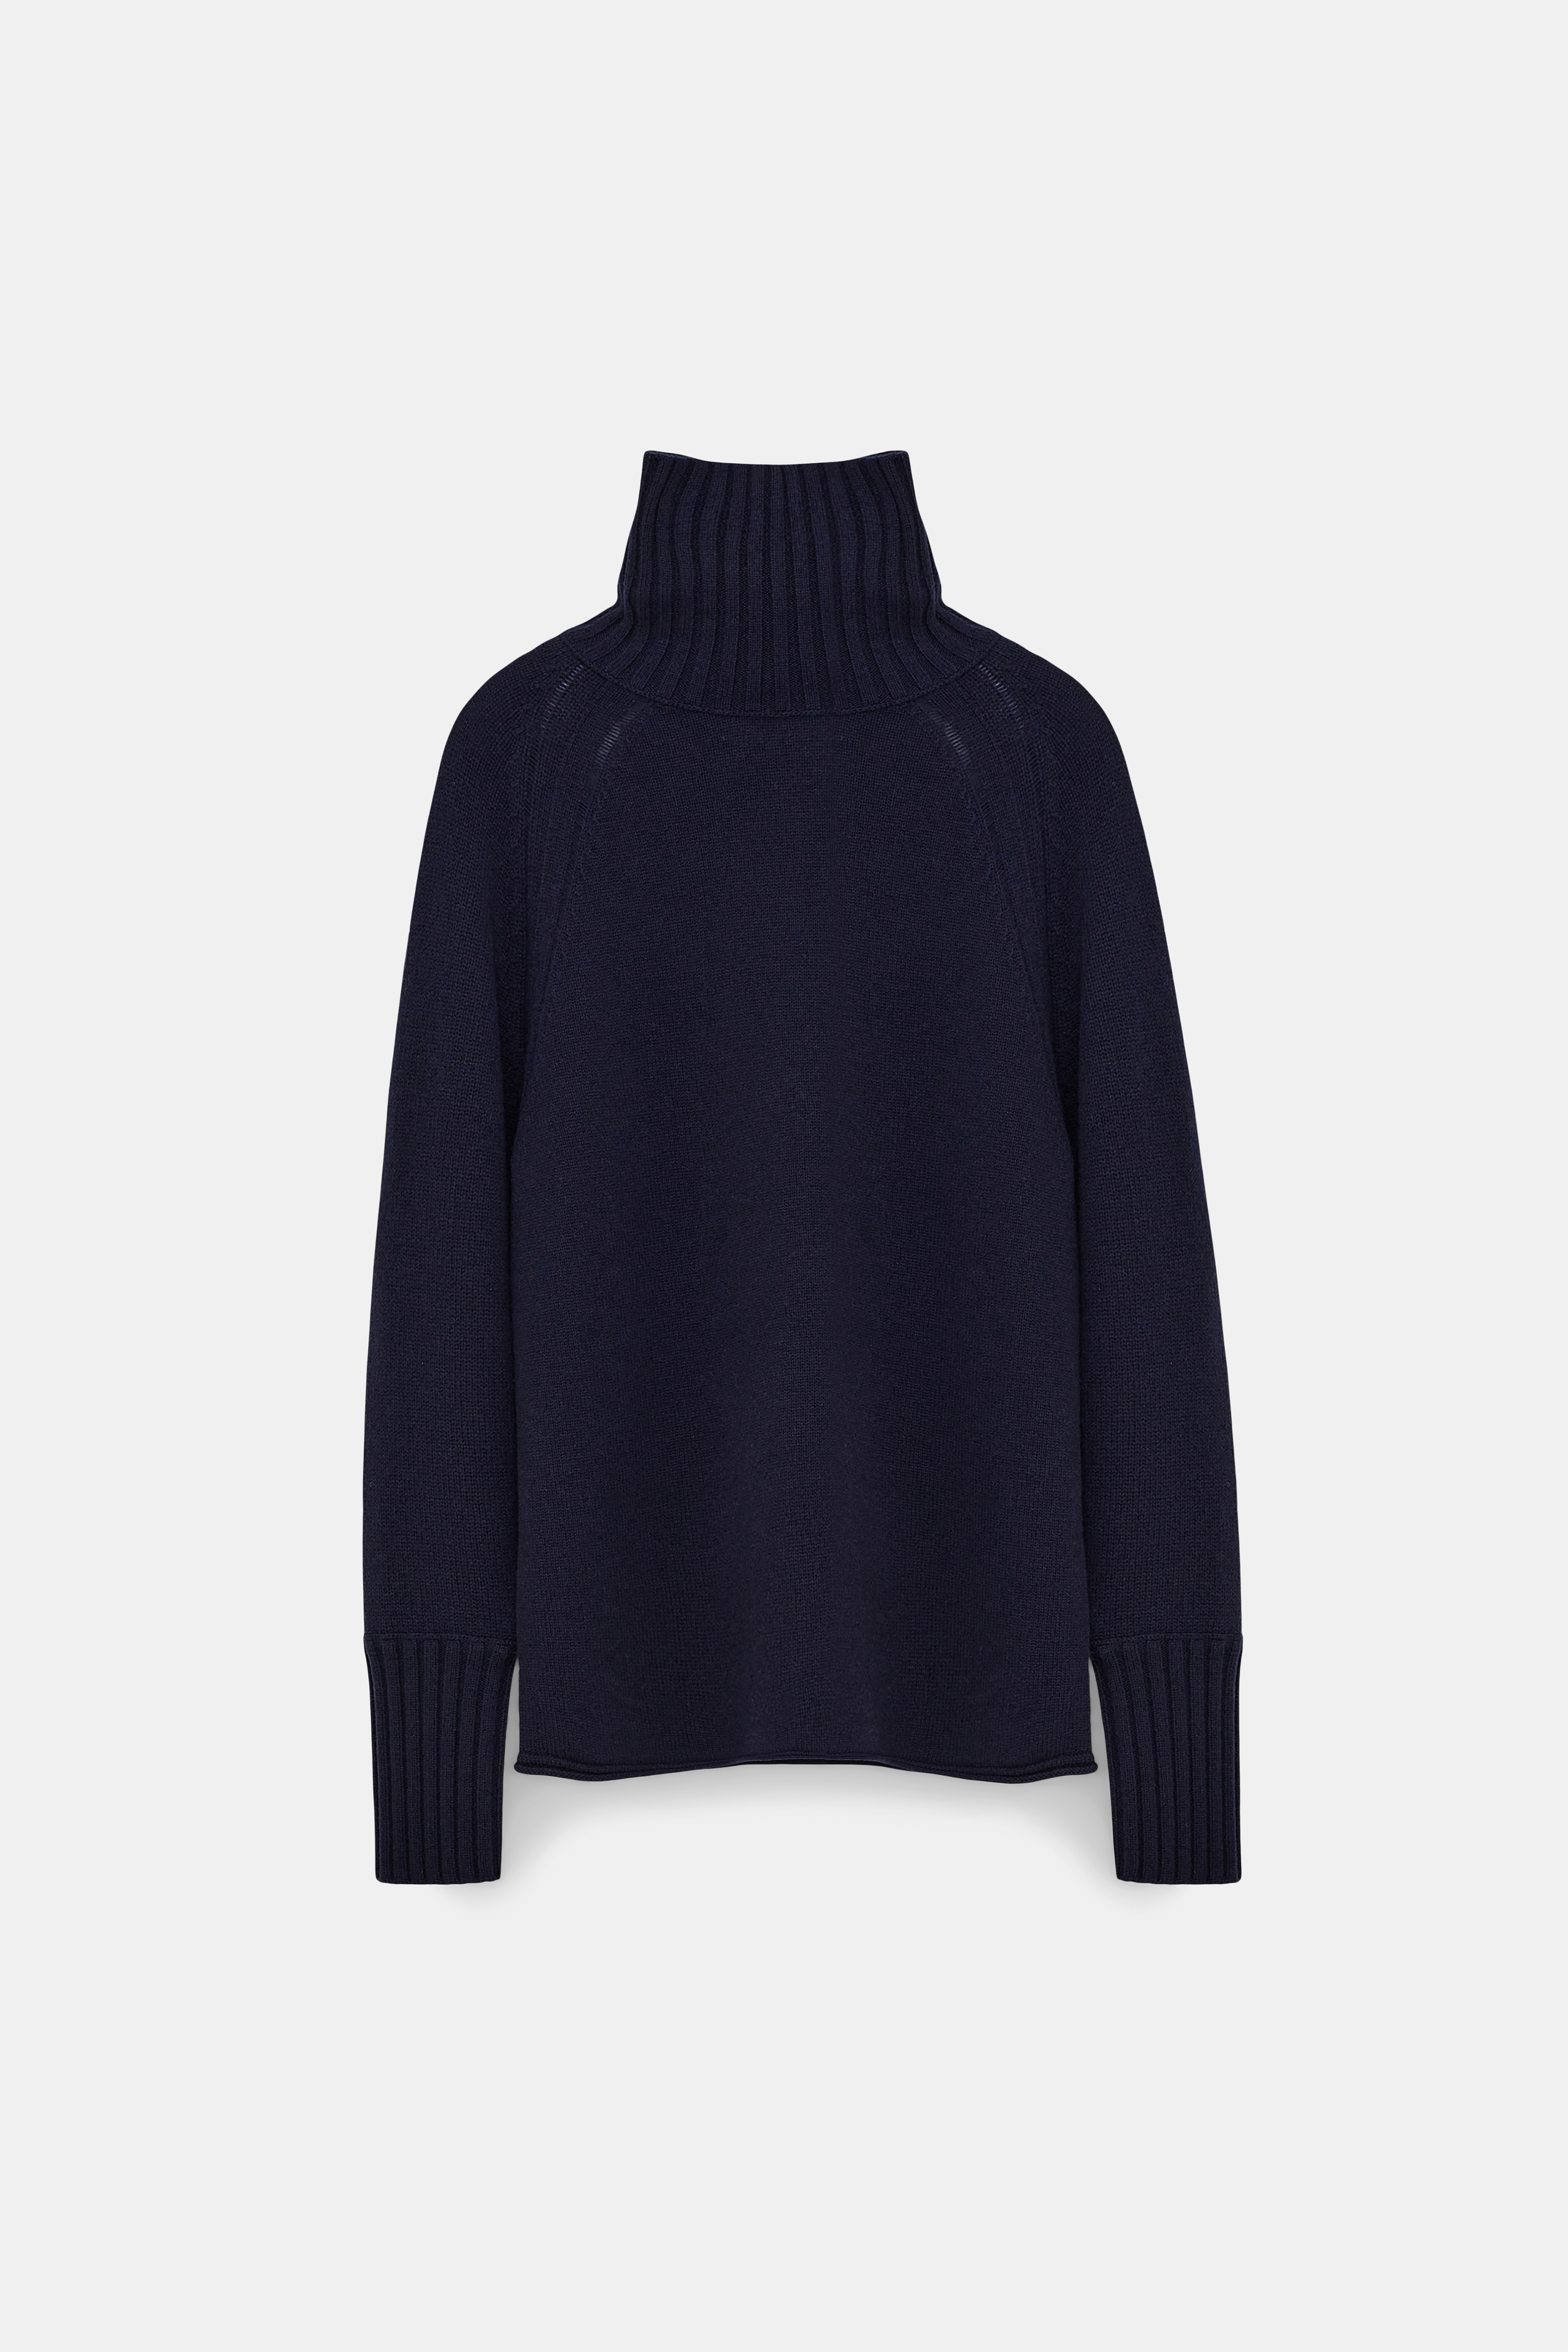 Dorothee Schumacher Cashmere And Wool Sweater In Blue